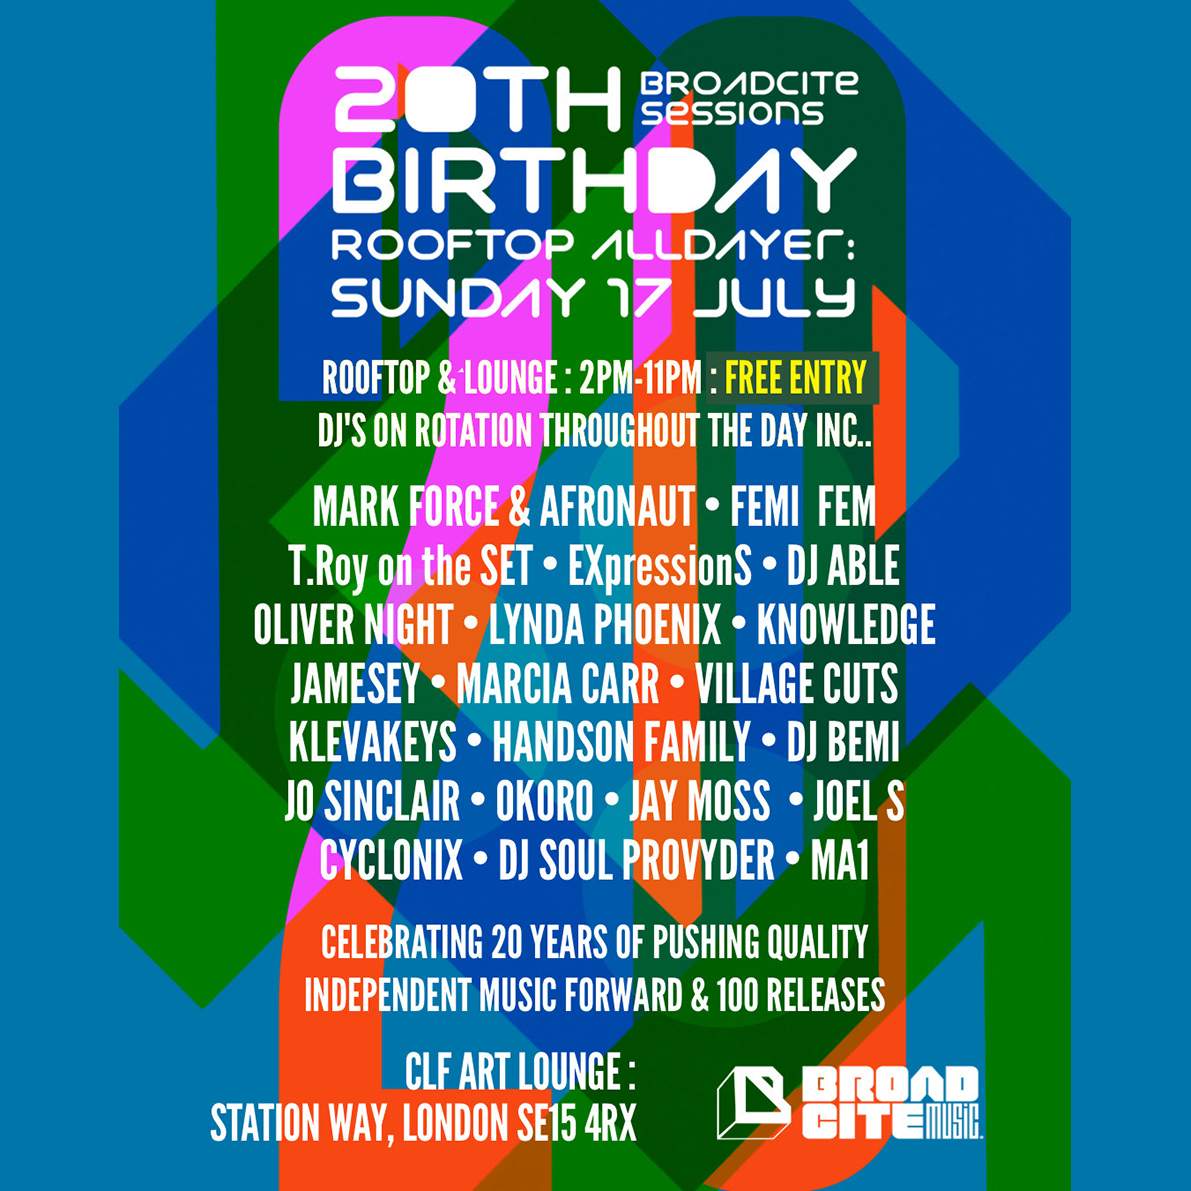 Broadcite Sessions 20th Anniversary Special, Free Entry - フライヤー裏